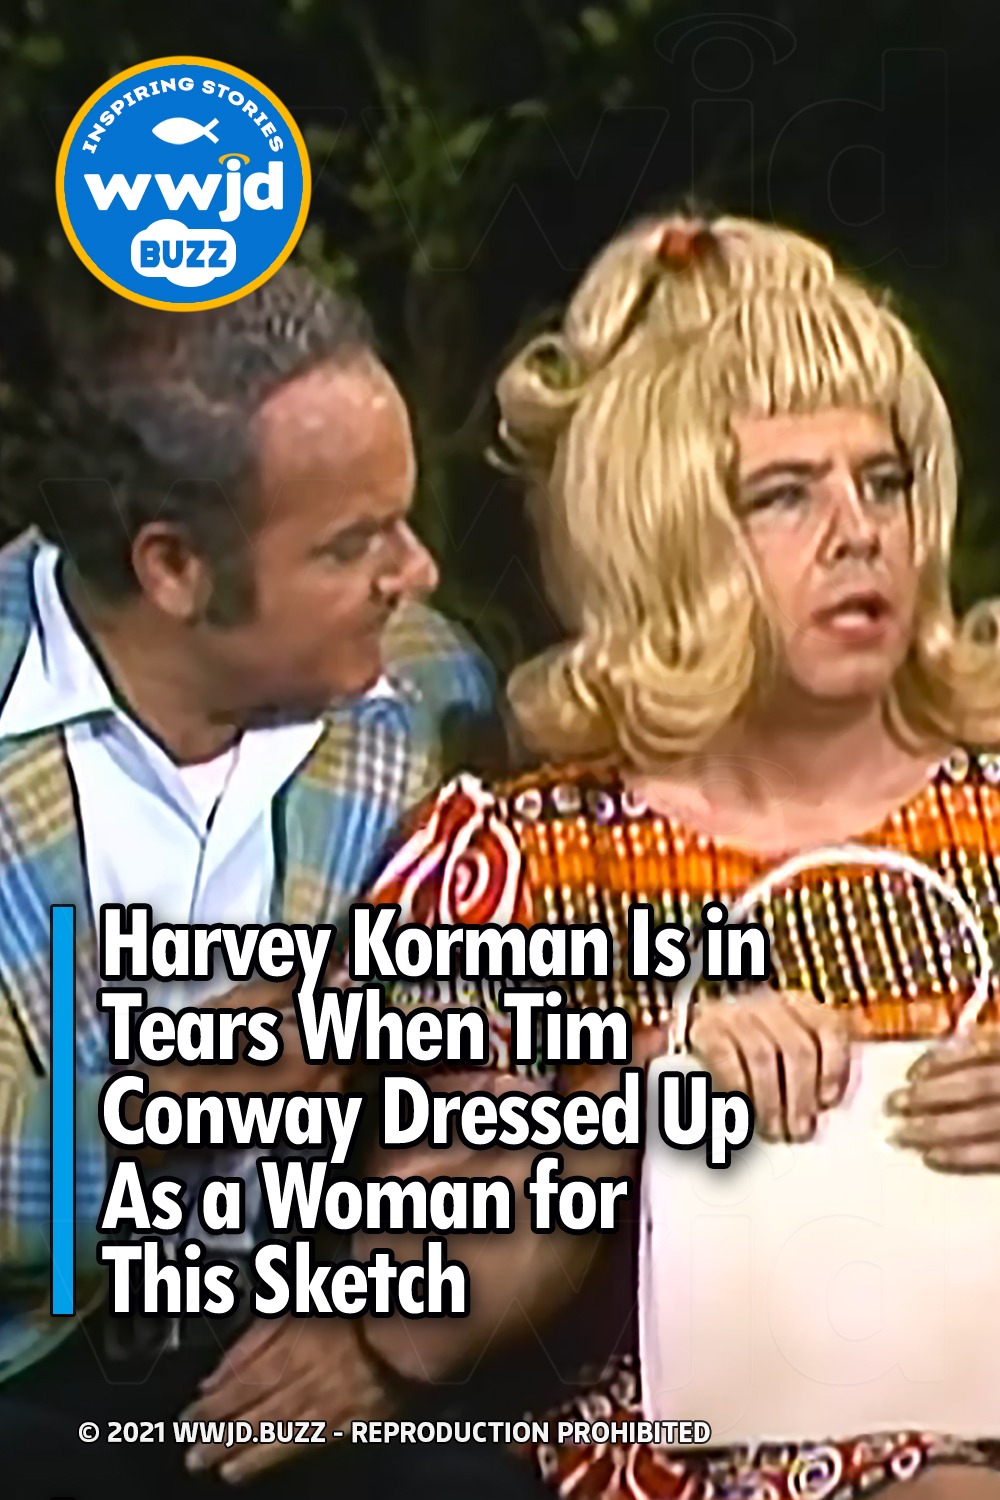 Harvey Korman Is in Tears When Tim Conway Dressed Up As a Woman for This Sketch